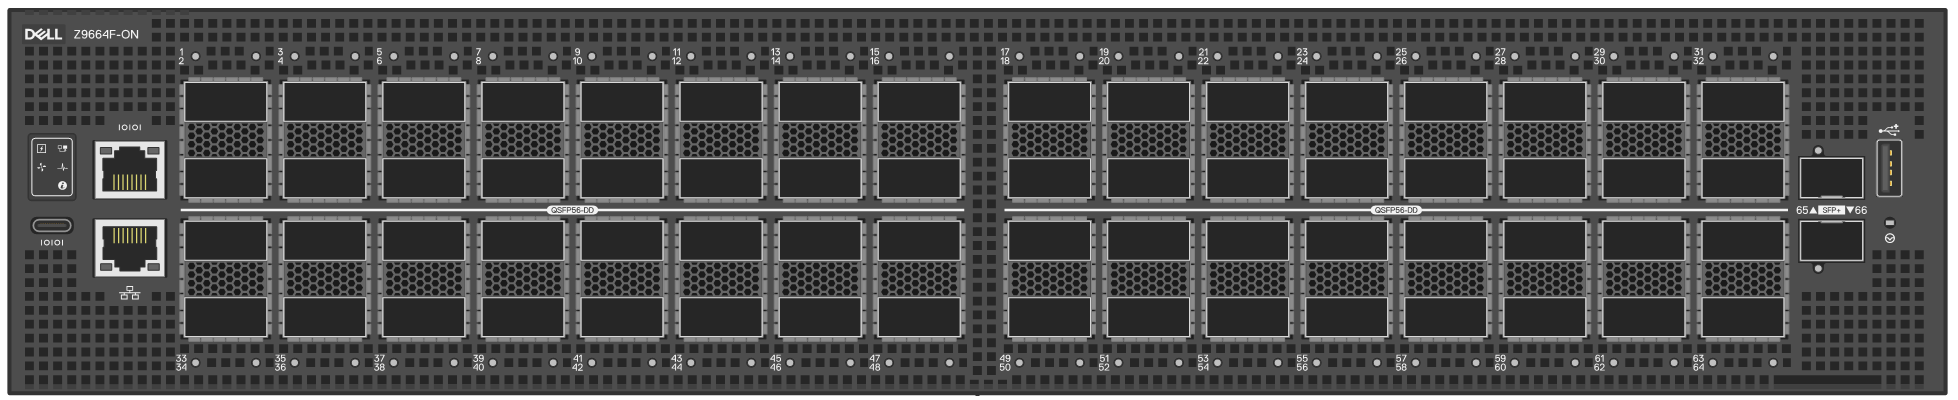 This graphic illustrates a front view of the Dell PowerSwitch Z9664F-ON